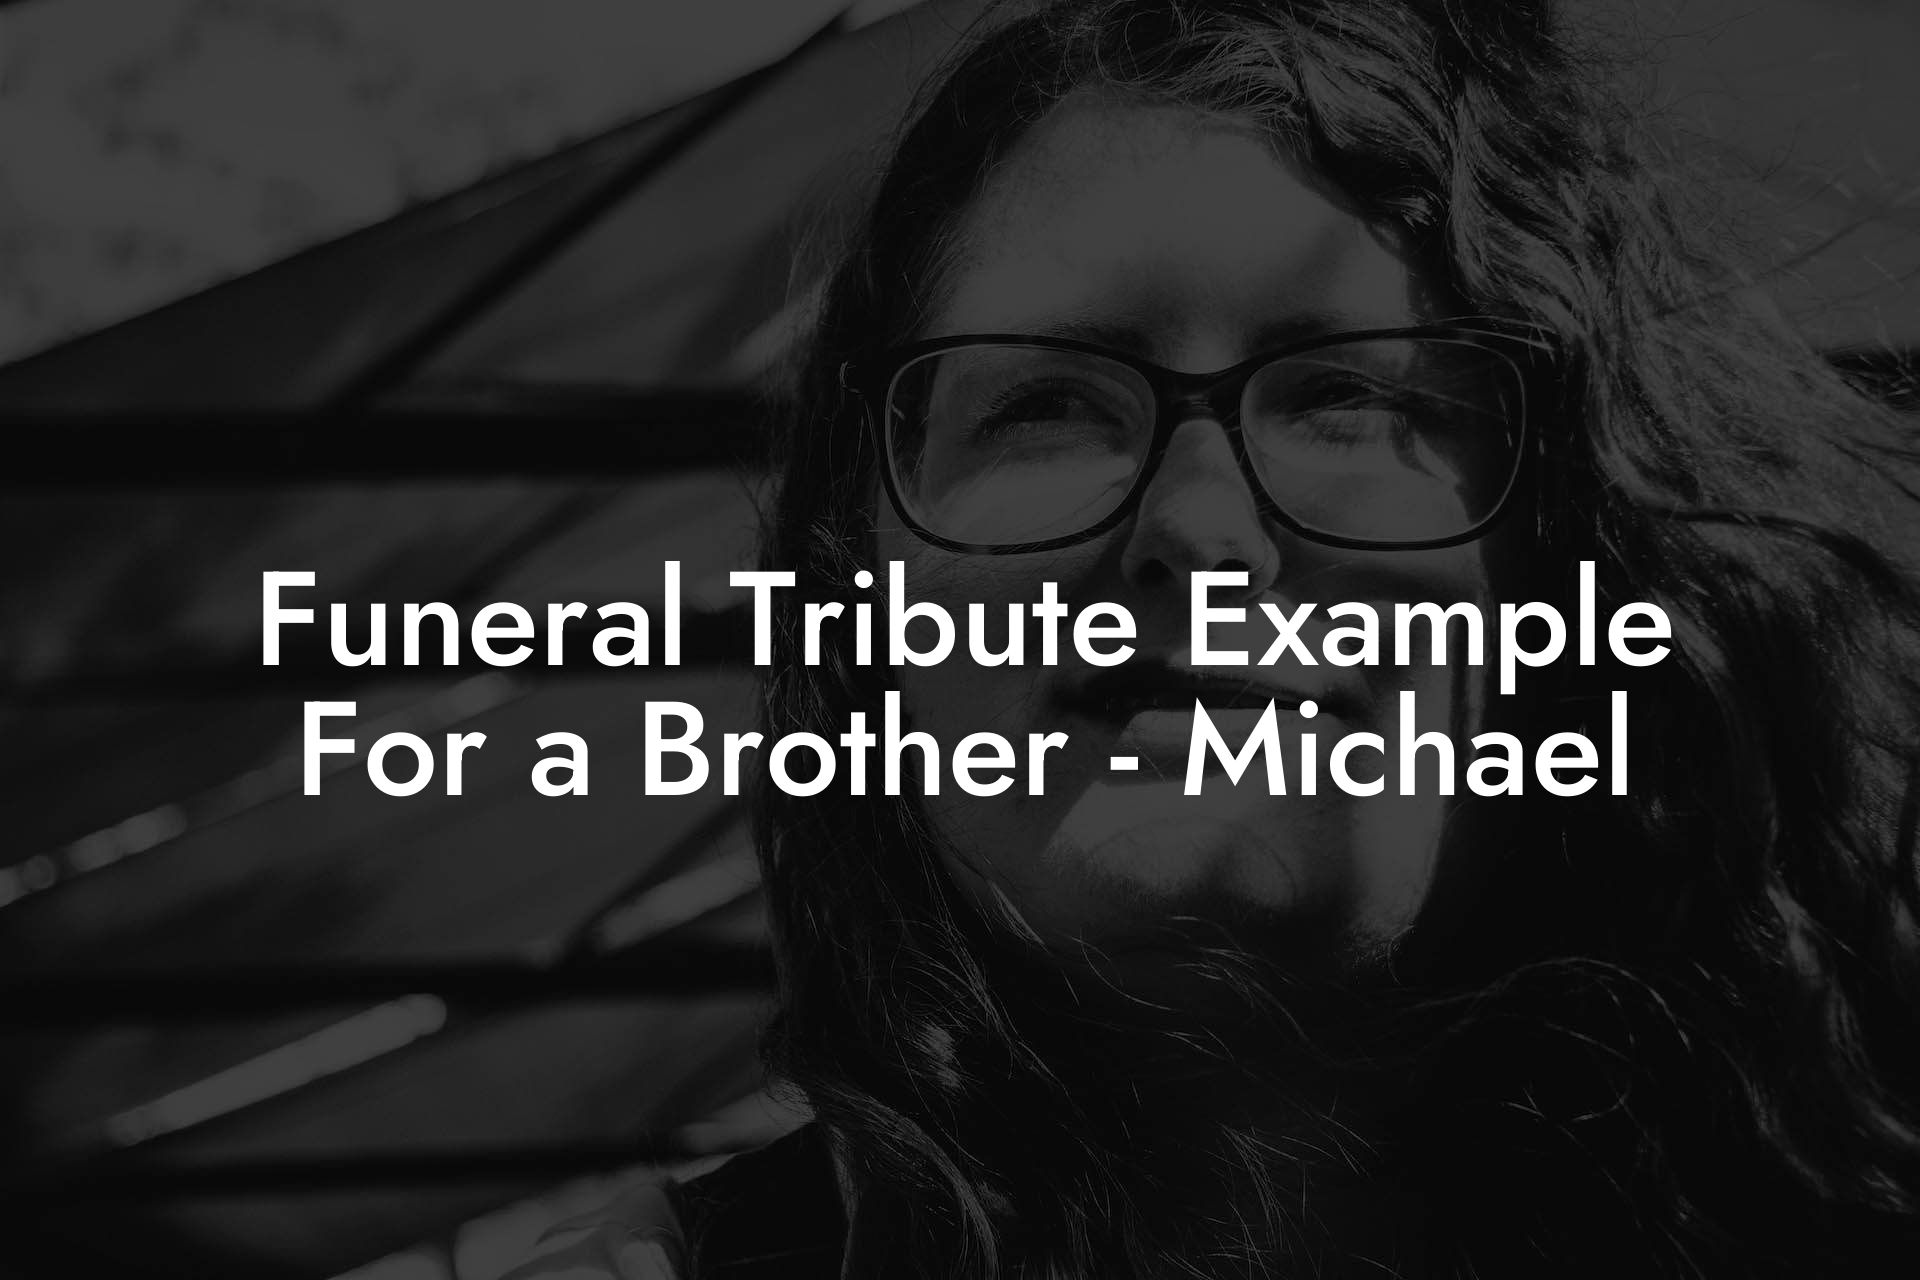 Funeral Tribute Example For a Brother - Michael